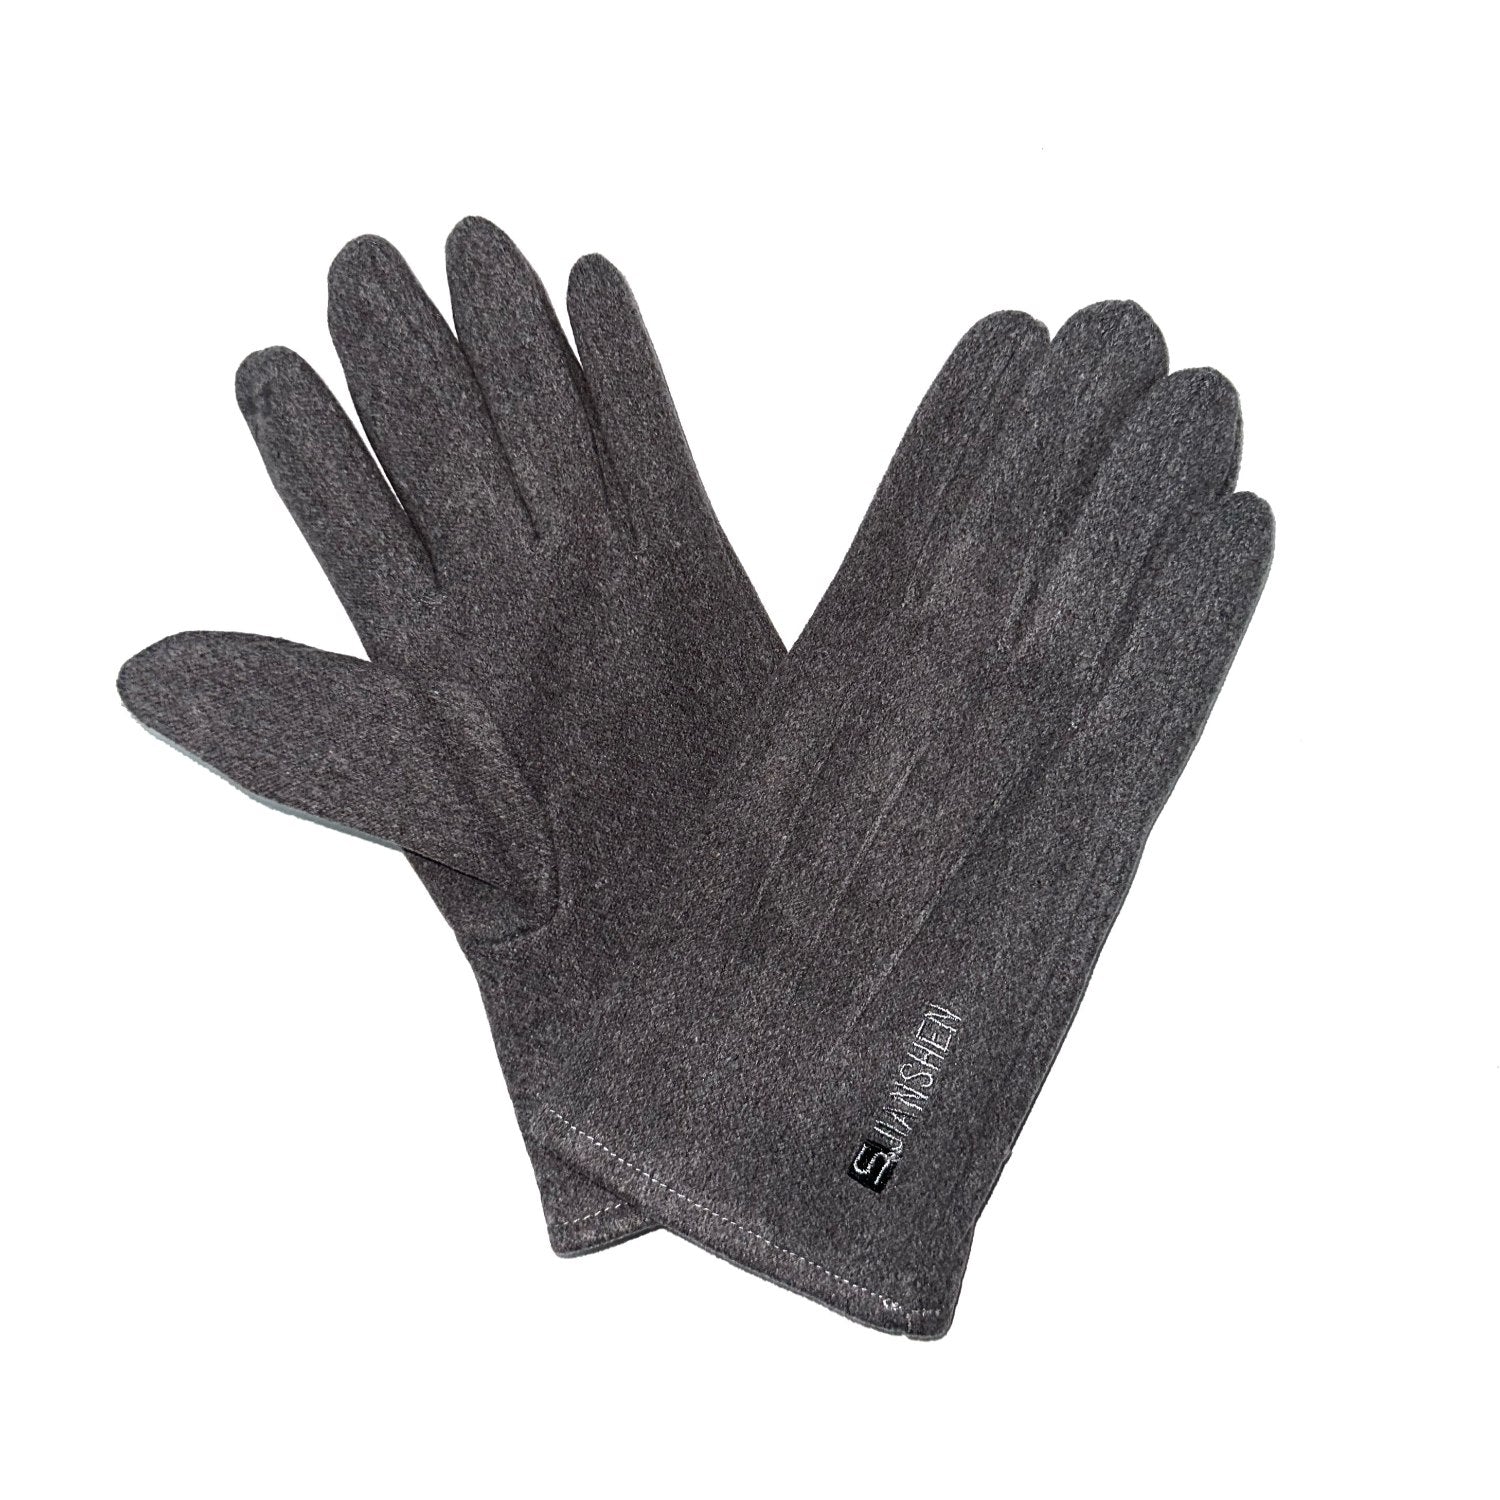 Buy Gokyo K2 Insulation Layering Gloves Grey | Cold Weather Gloves at Gokyo Outdoor Clothing & Gear